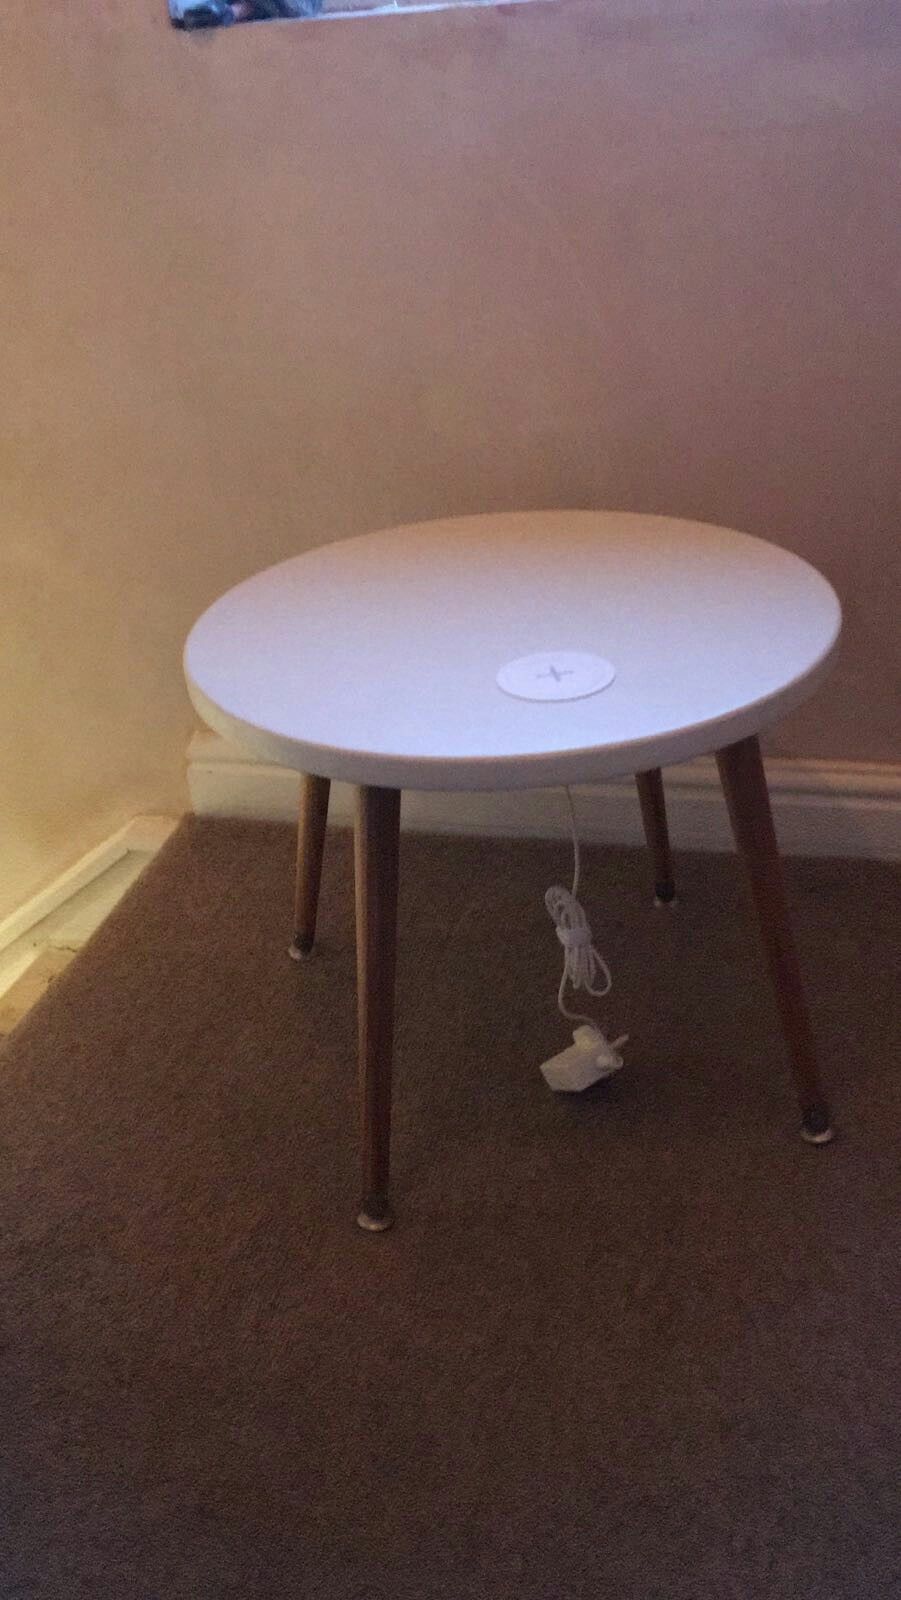 charble wireless phone charging round table handbuilt solid end with wood painted white oak legs charges all devices cases can bought enable older phones metal drum accent vintage